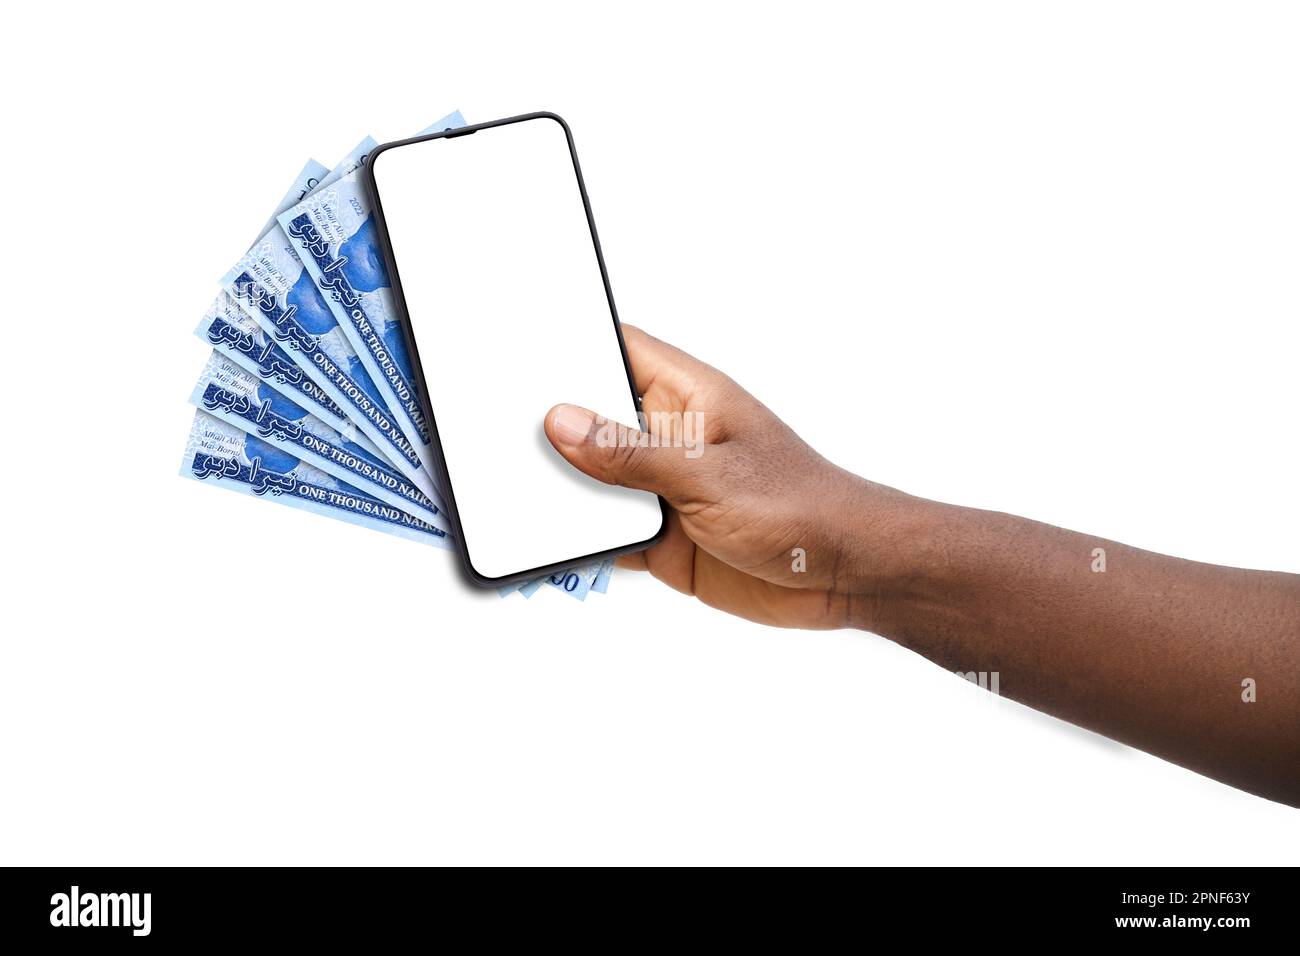 Black hand holding mobile phone with blank screen and Nigerian naira notes Stock Photo